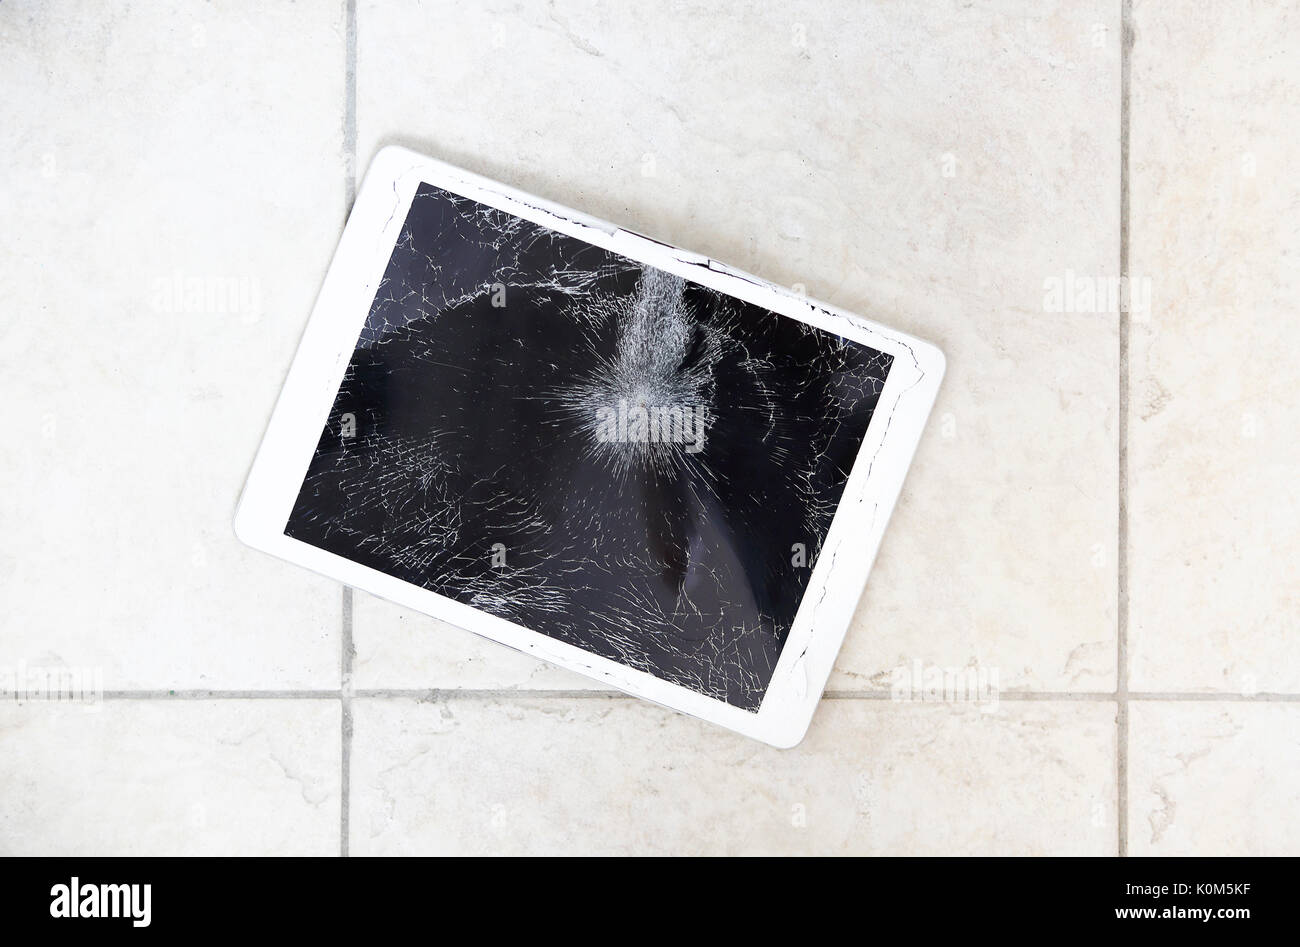 Damaged or broken tablet computer lcd display on the floor Stock Photo